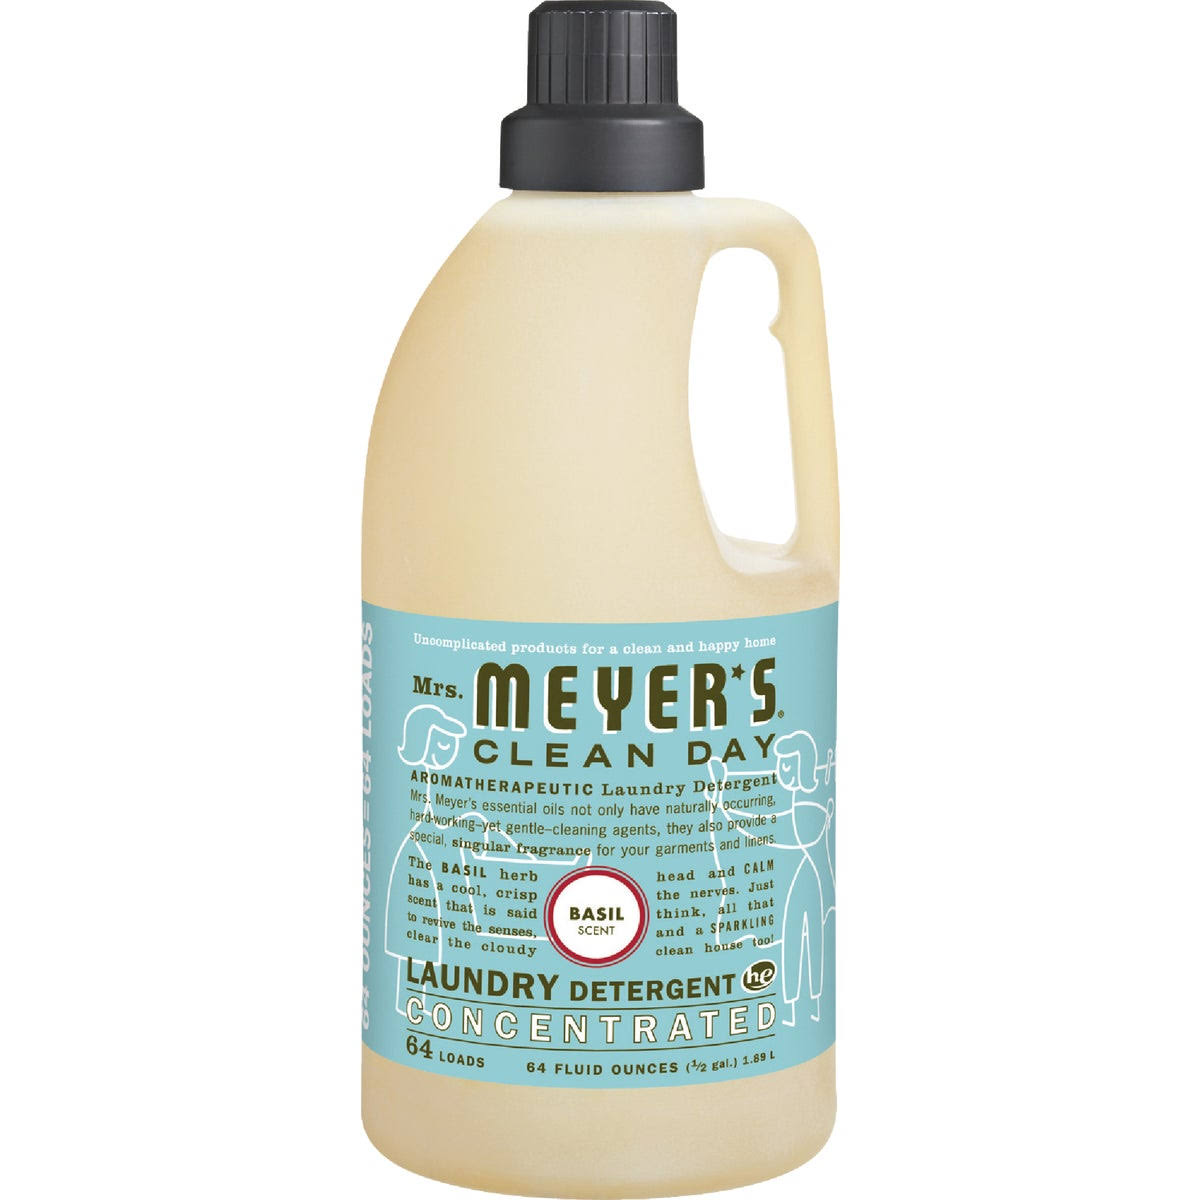 Mrs. Meyer's Laundry Detergent Concentrated - 64oz